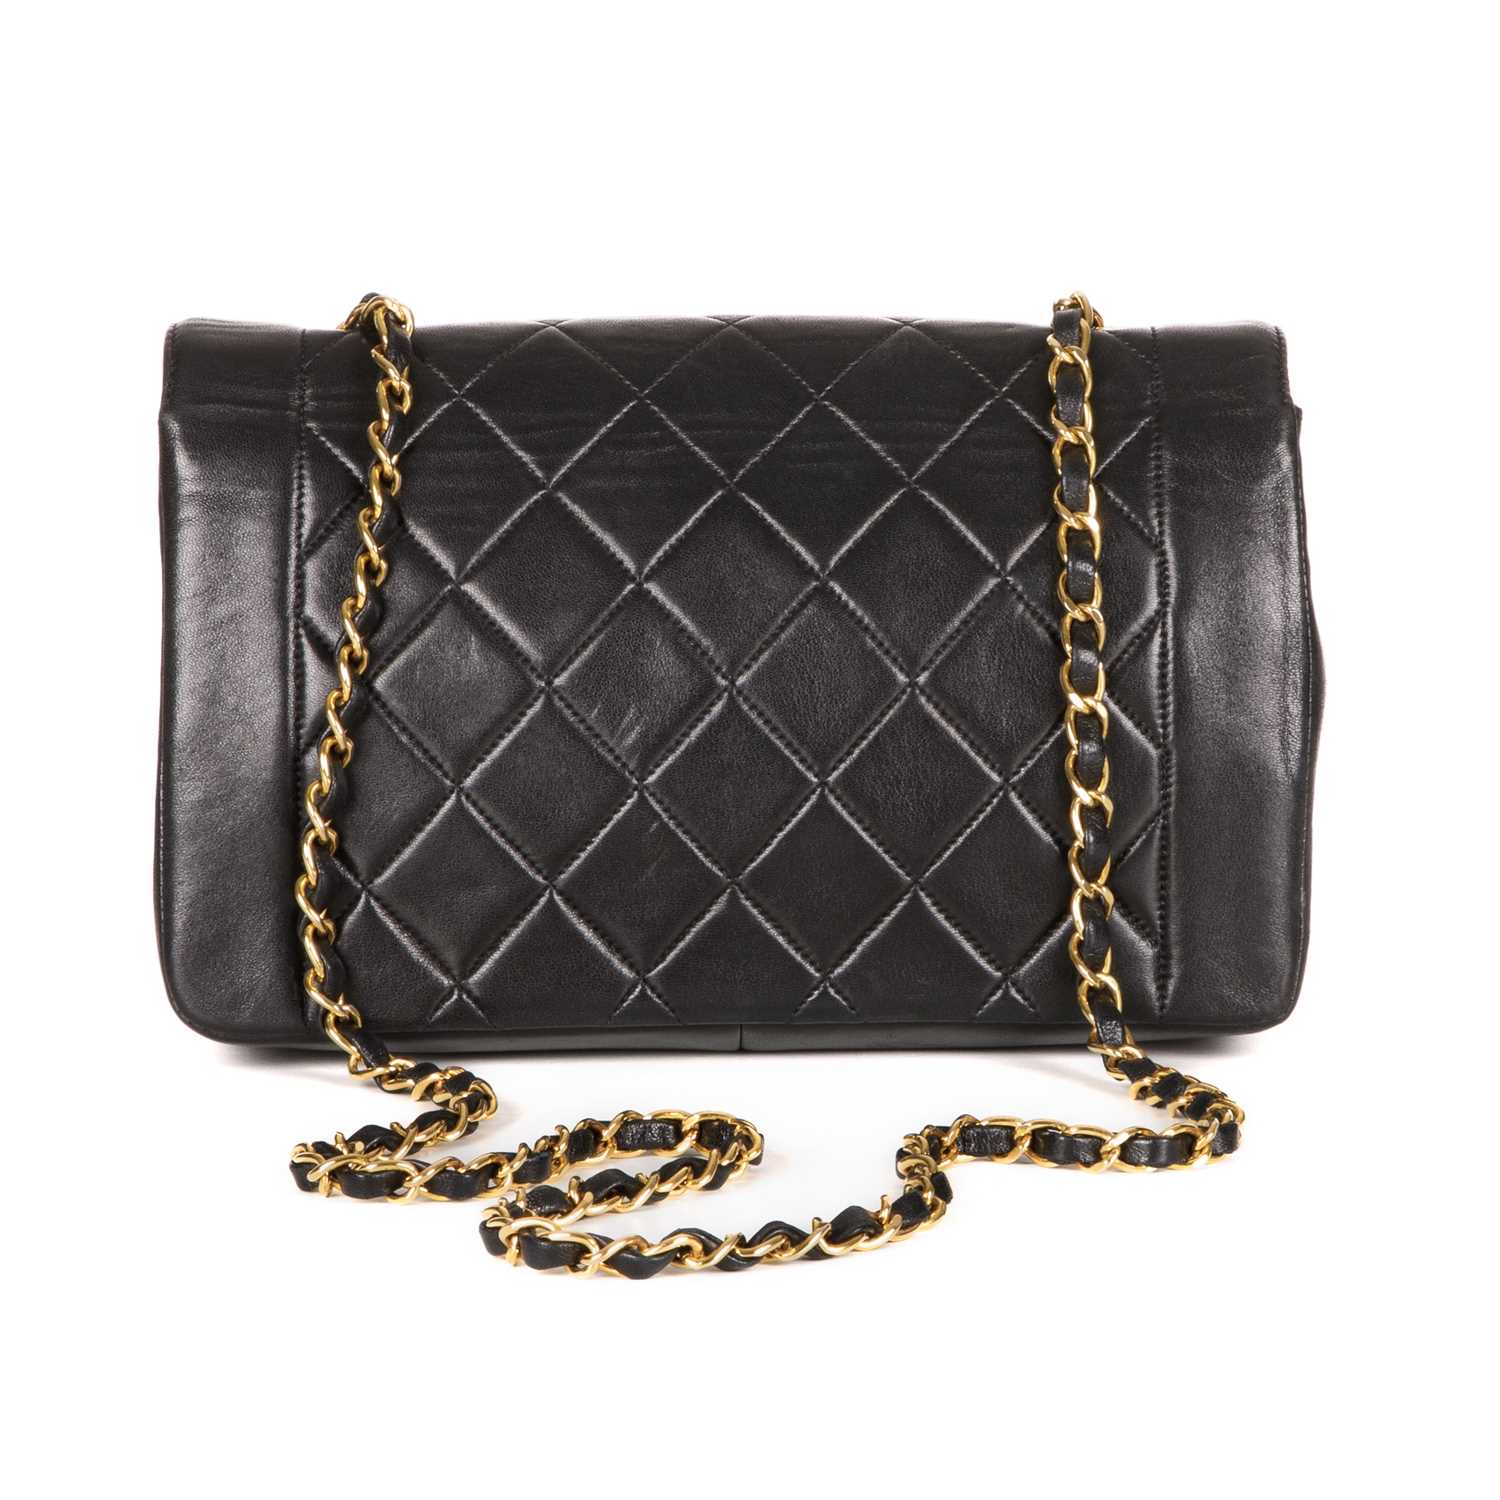 Chanel, a vintage Diana Flap handbag, designed with a diamond quilted black lambskin leather - Image 2 of 4